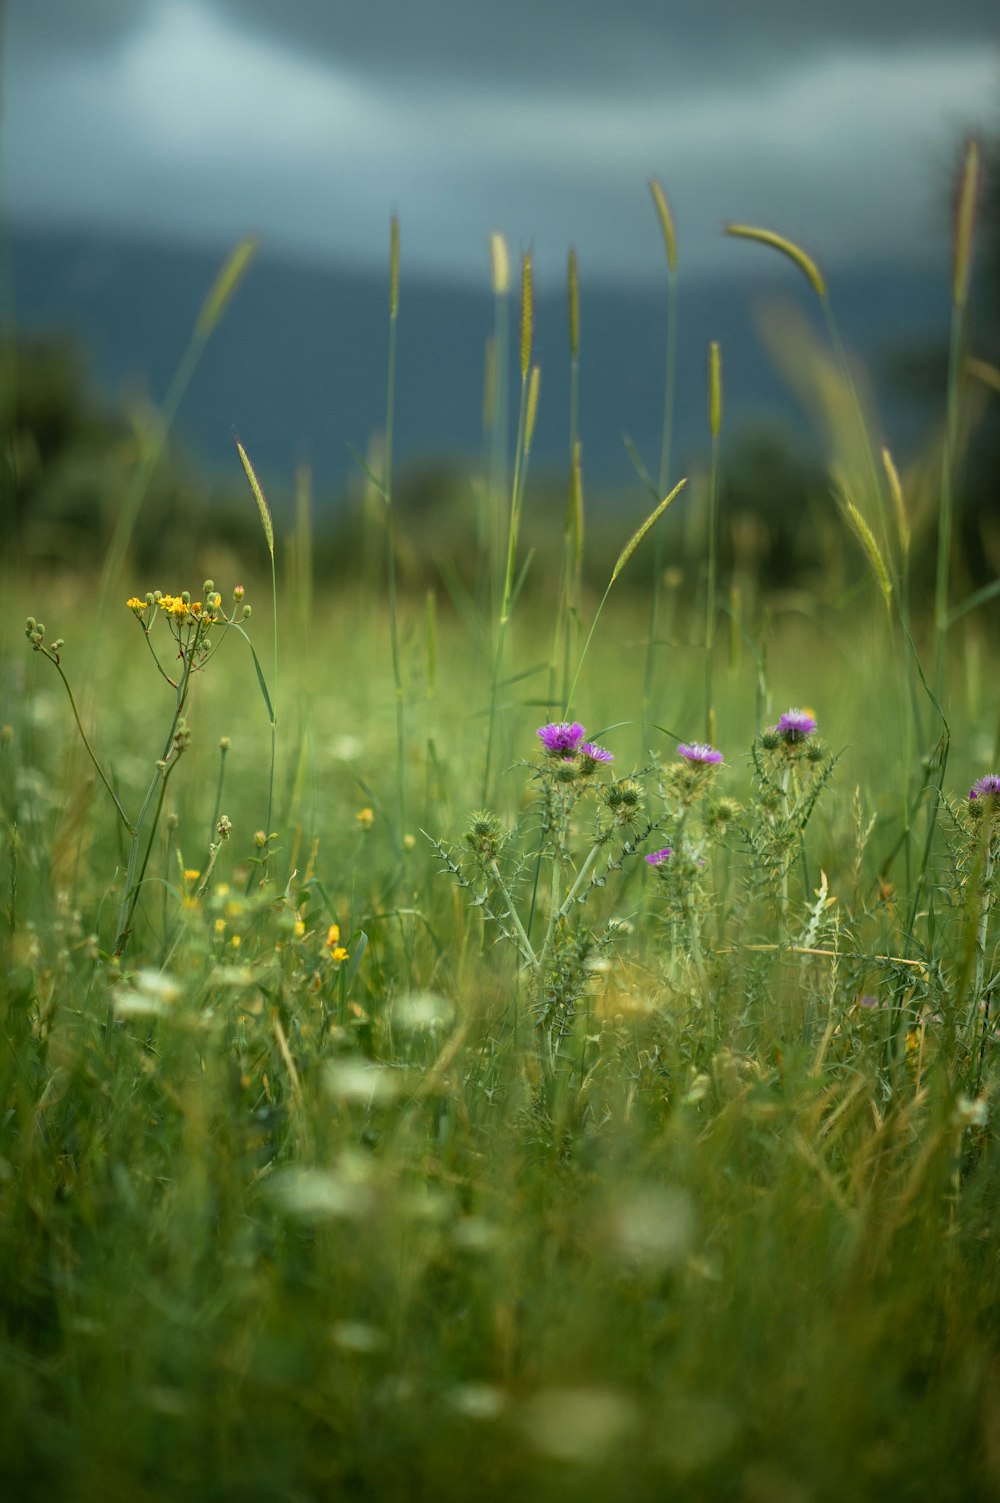 a field of grass and wildflowers under a cloudy sky